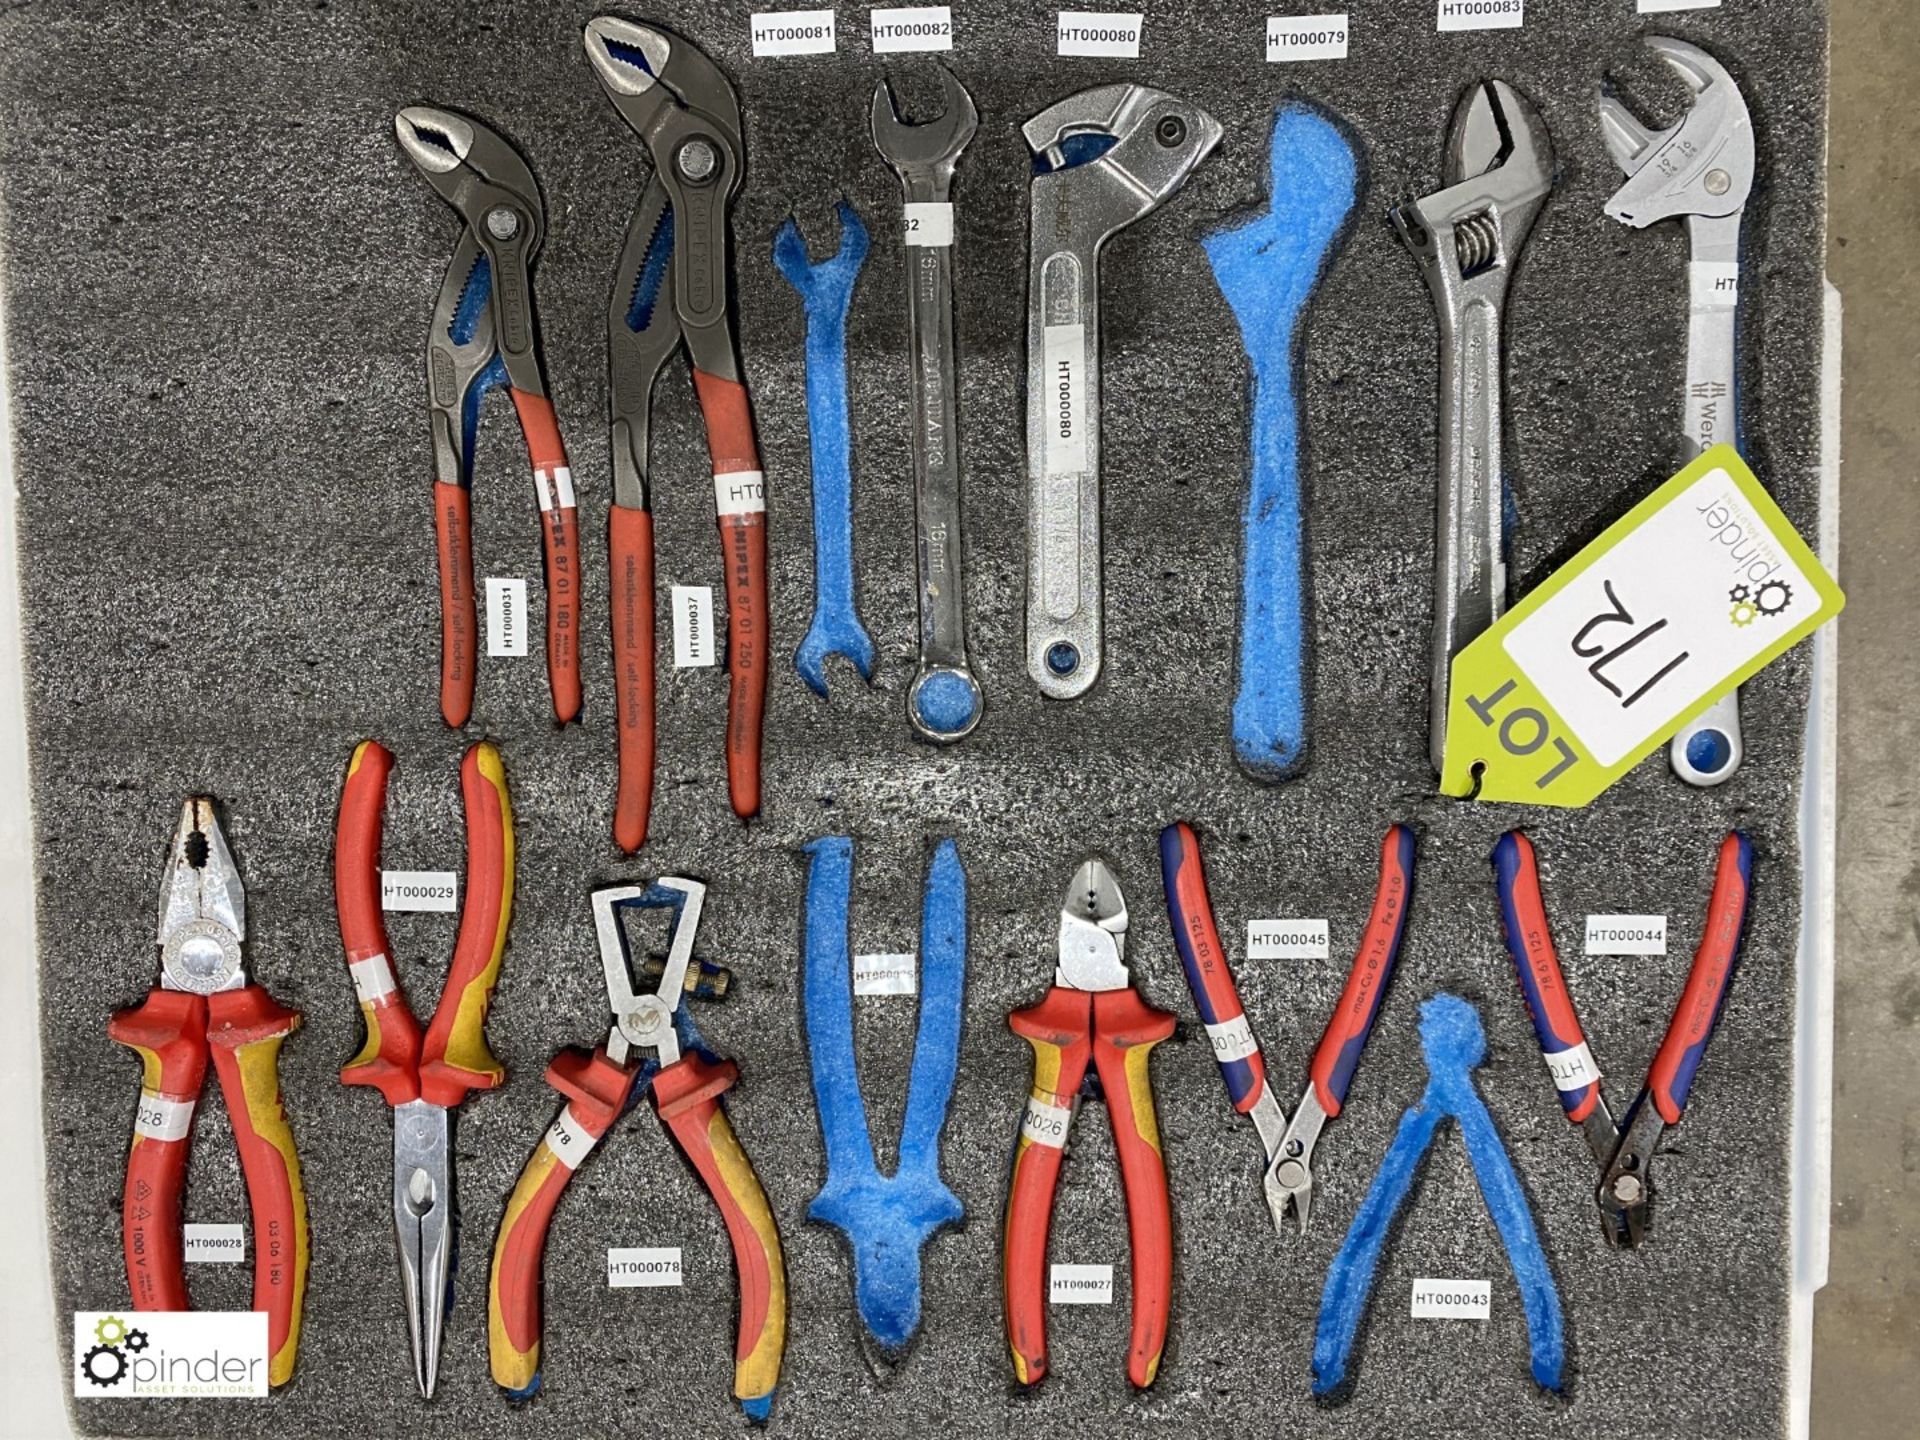 6 various Cable Snips, 2 Pipe Wrenches and 3 Spanners